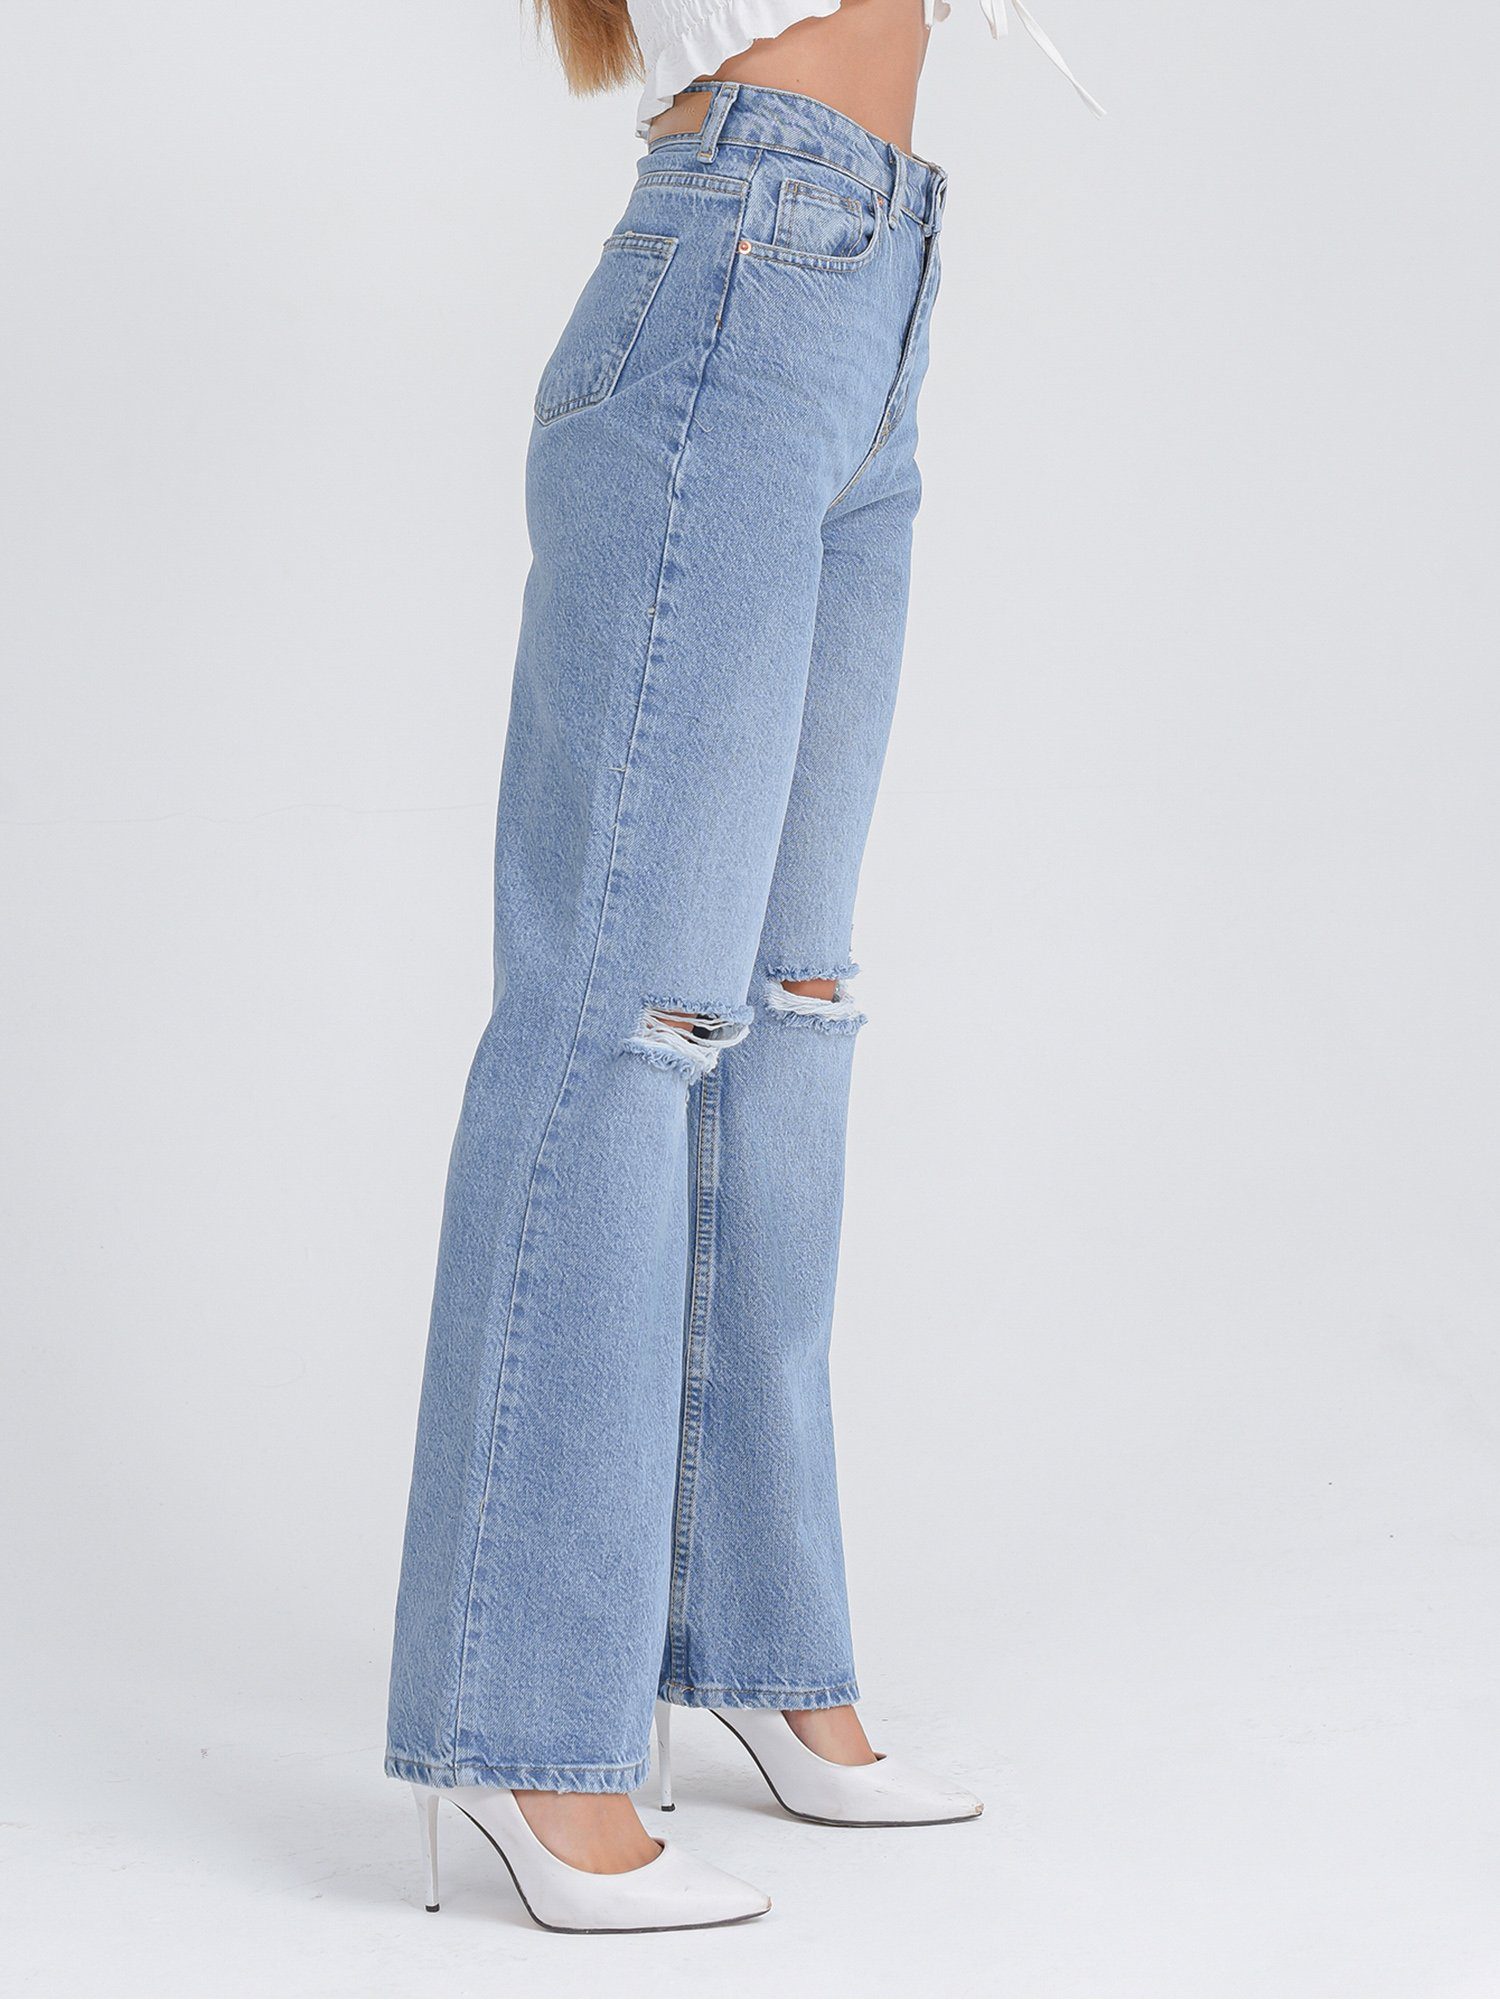 Freshlions Weite 'CECILE' Freshlions Jeans Jeans